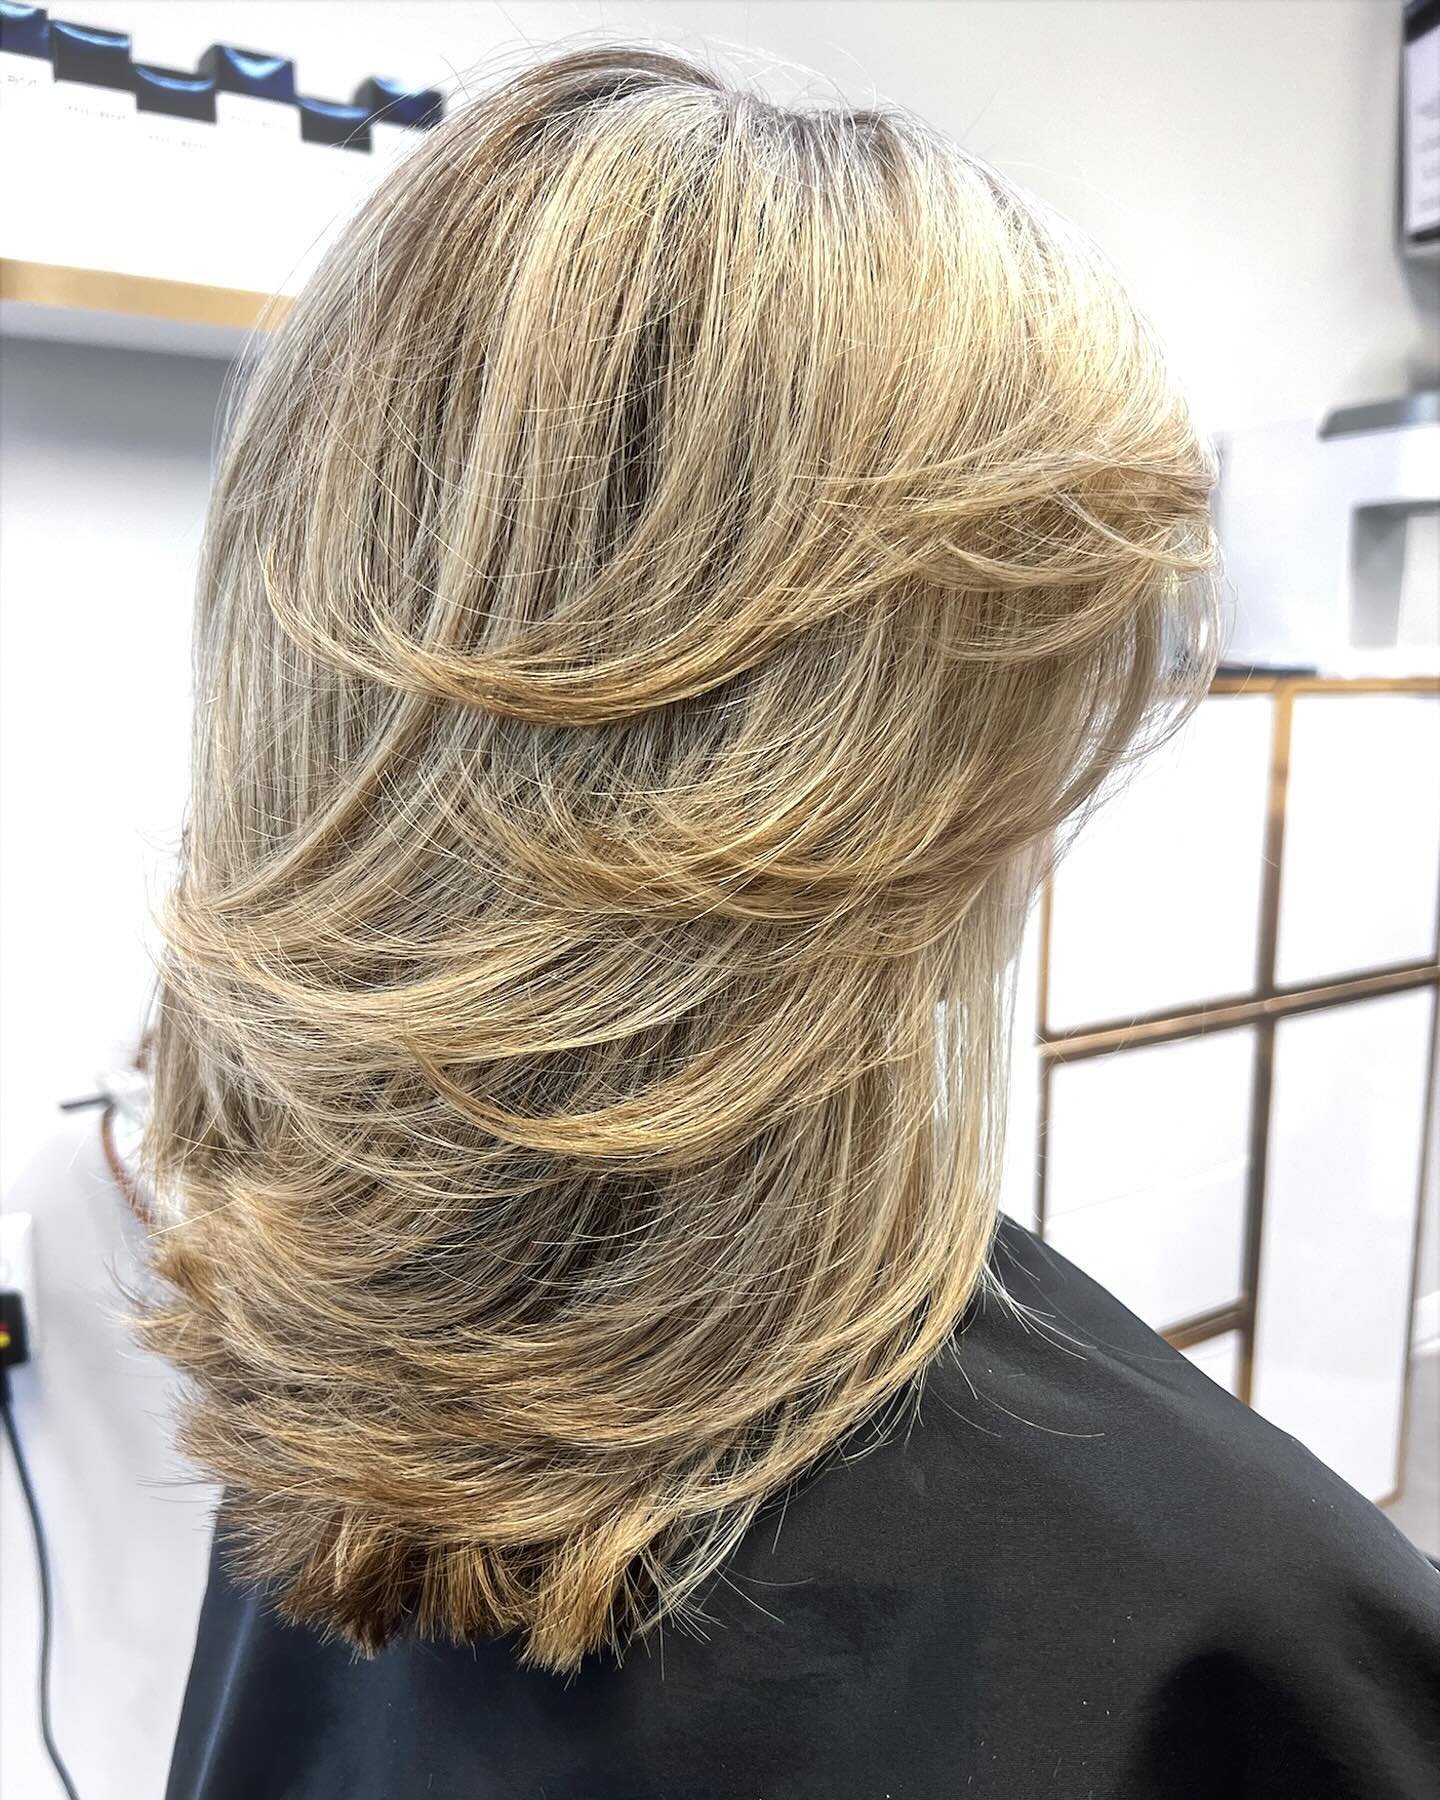 Blonde highlights meet Scott Risk&rsquo;s signature layers for a stunning natural look

#scottriskhair #scottrisksignaturelayers #friscolayeredhaircut #friscostylist #longlayers #blondehair #blondehighlights